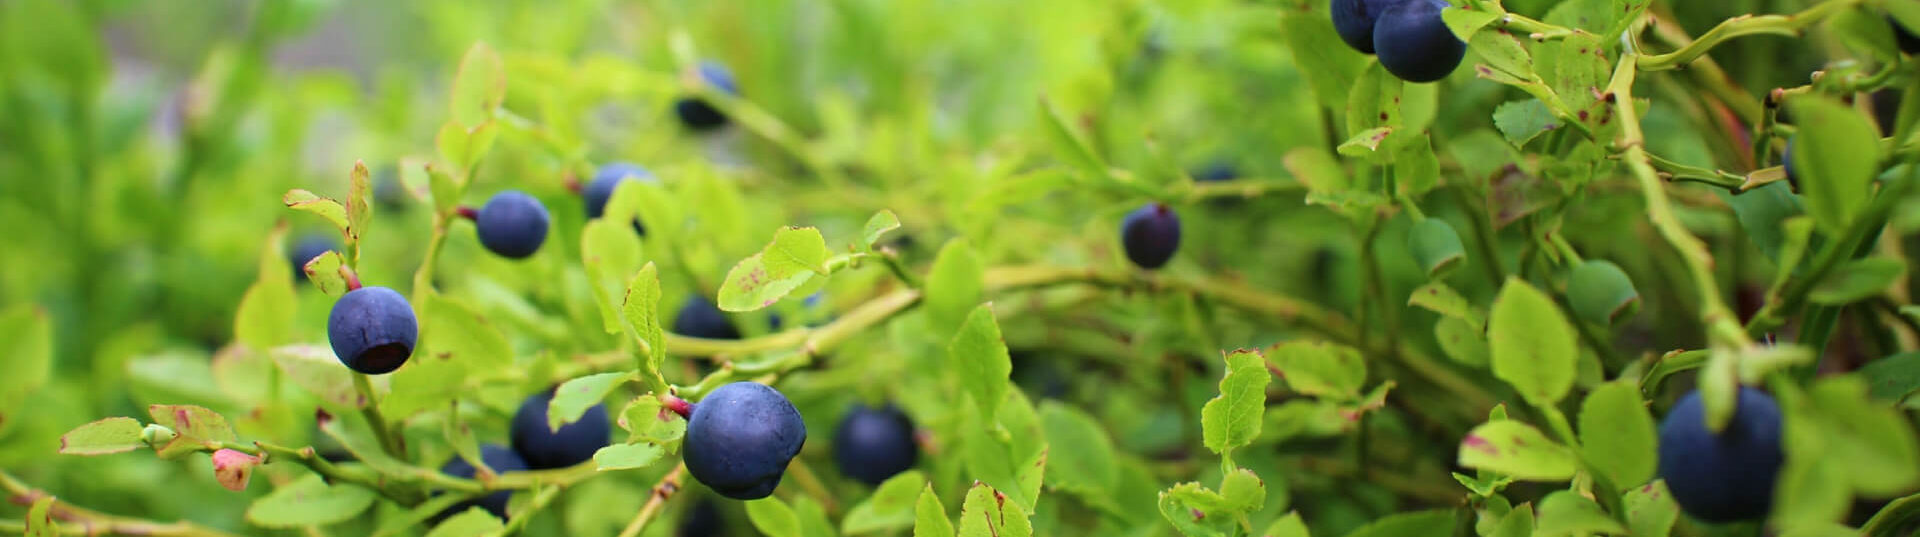 Expert Guide to Growing Blueberries in Soil